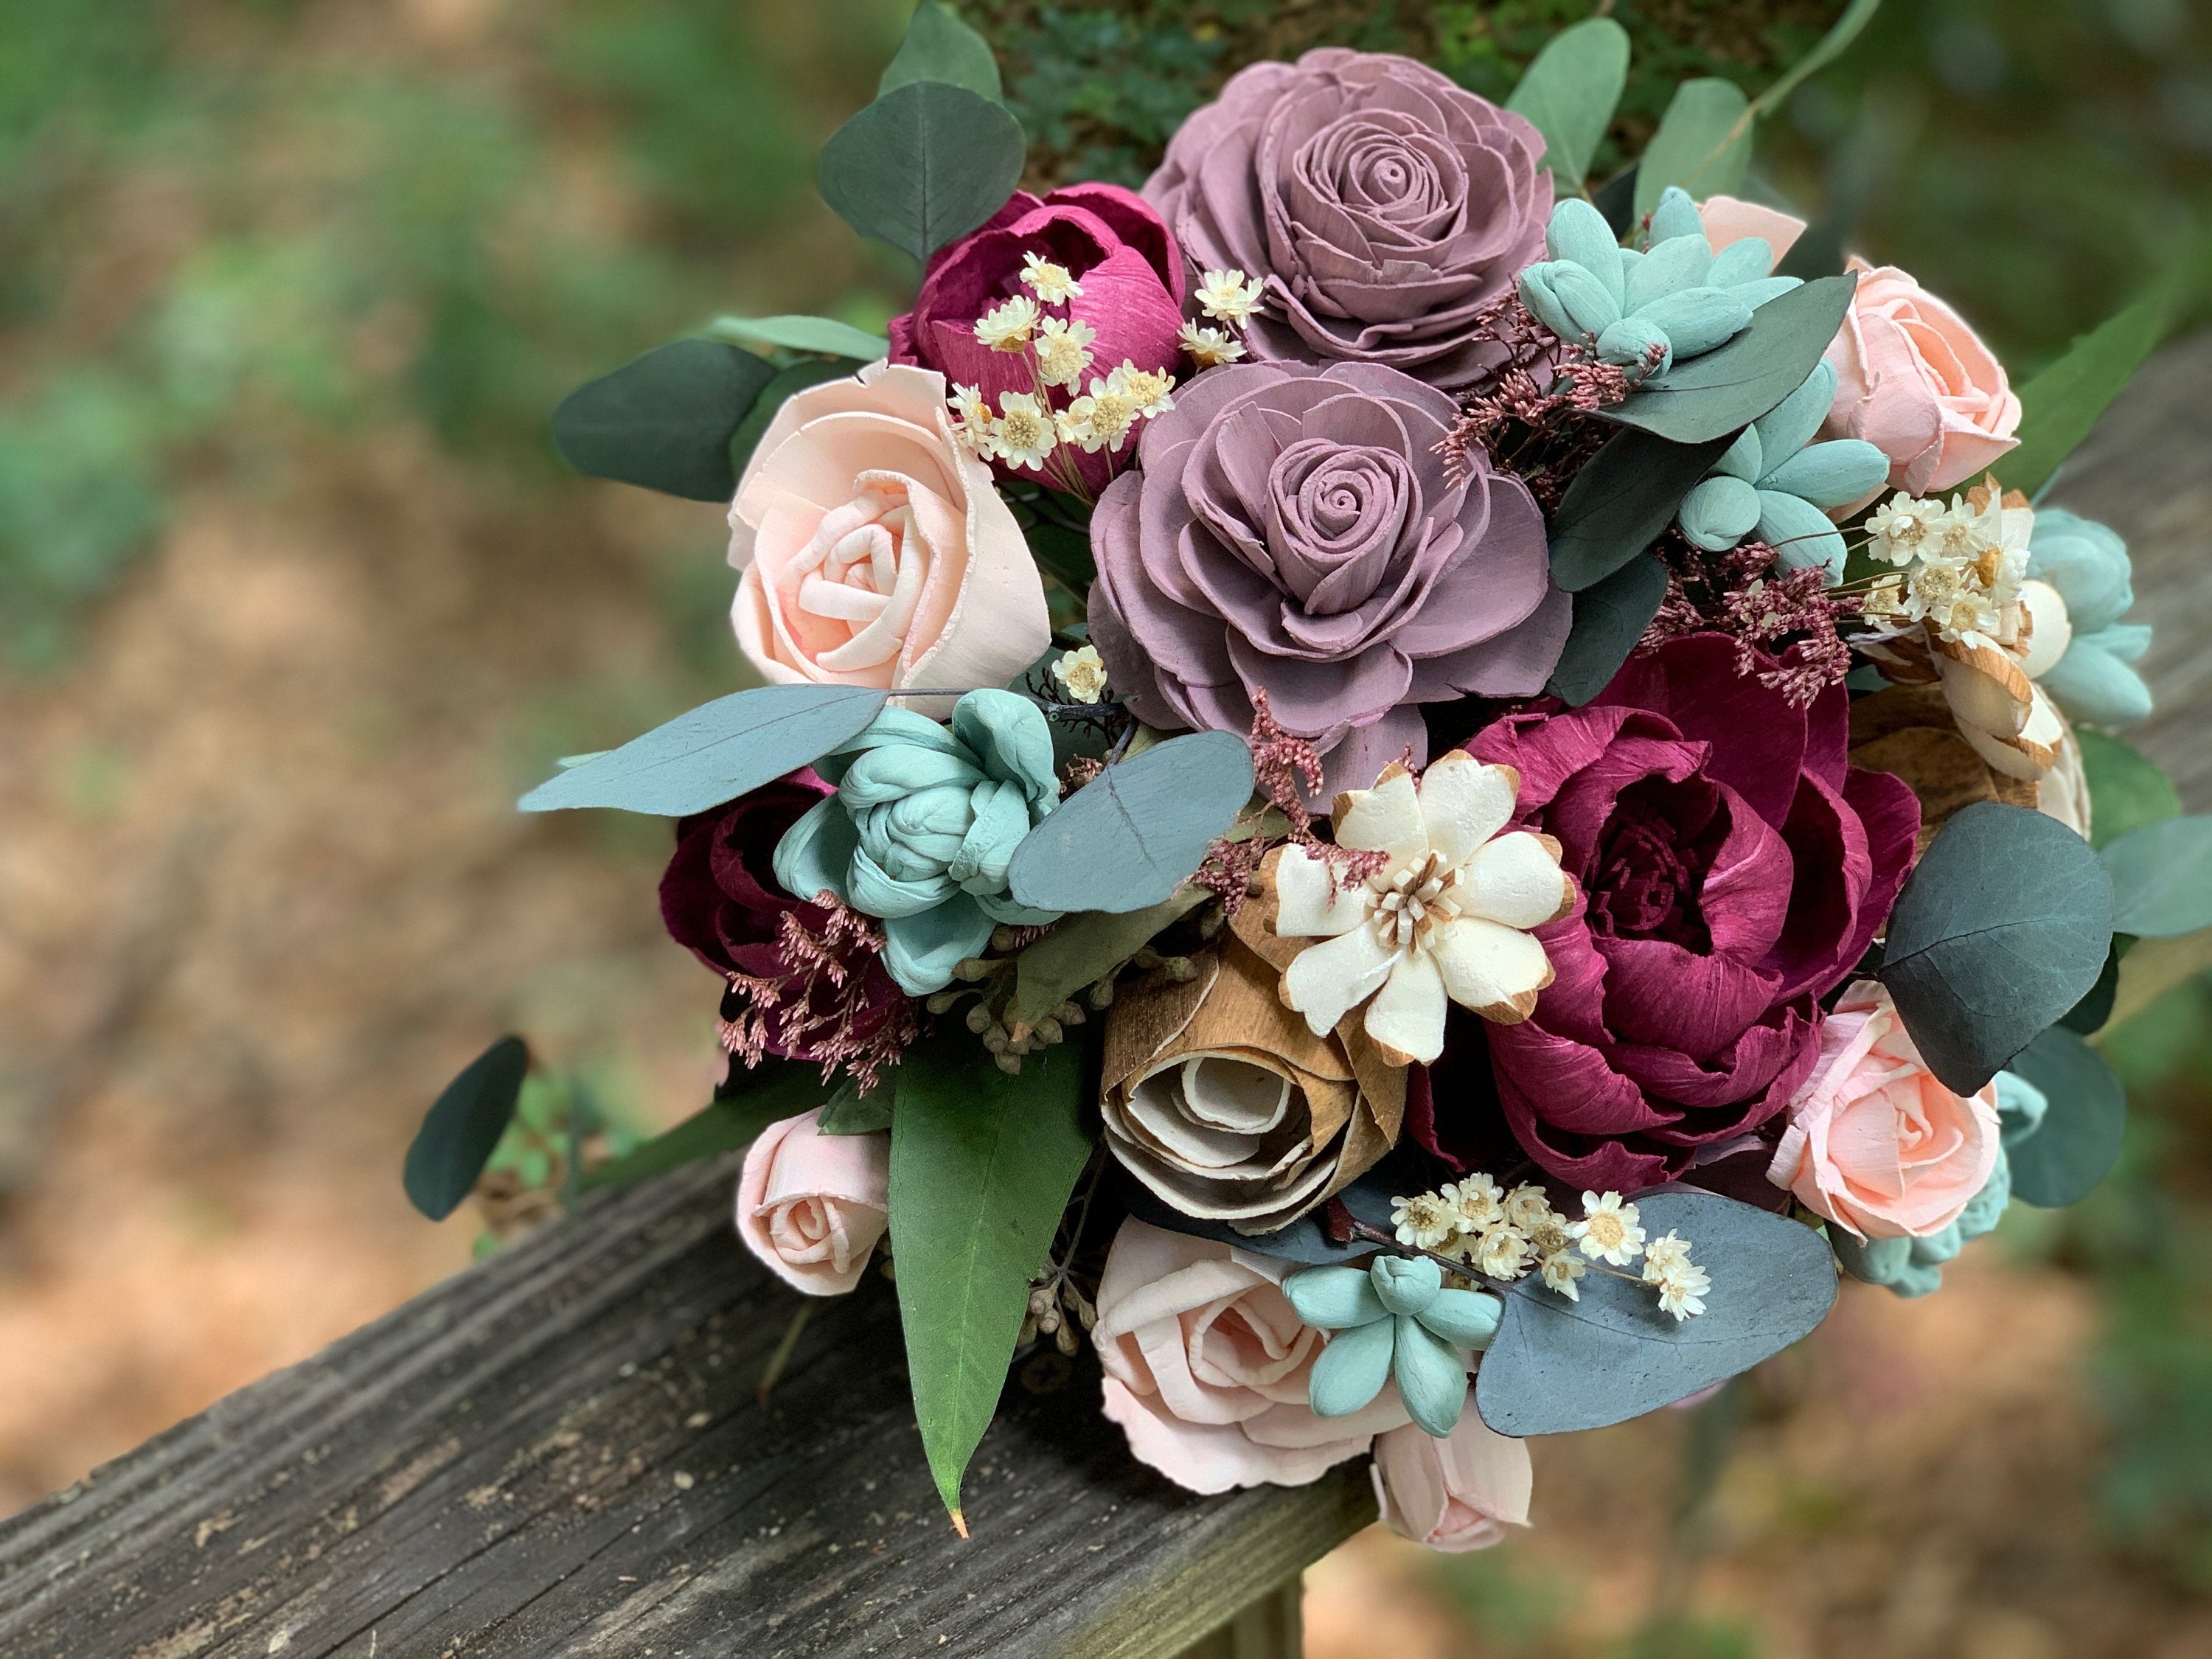 Burgundy and blush bridal bouquet with roses Romantic eucalyptus wedding  accessories Greenery bouquet Peach peony toss bouquet Magaela – magaela